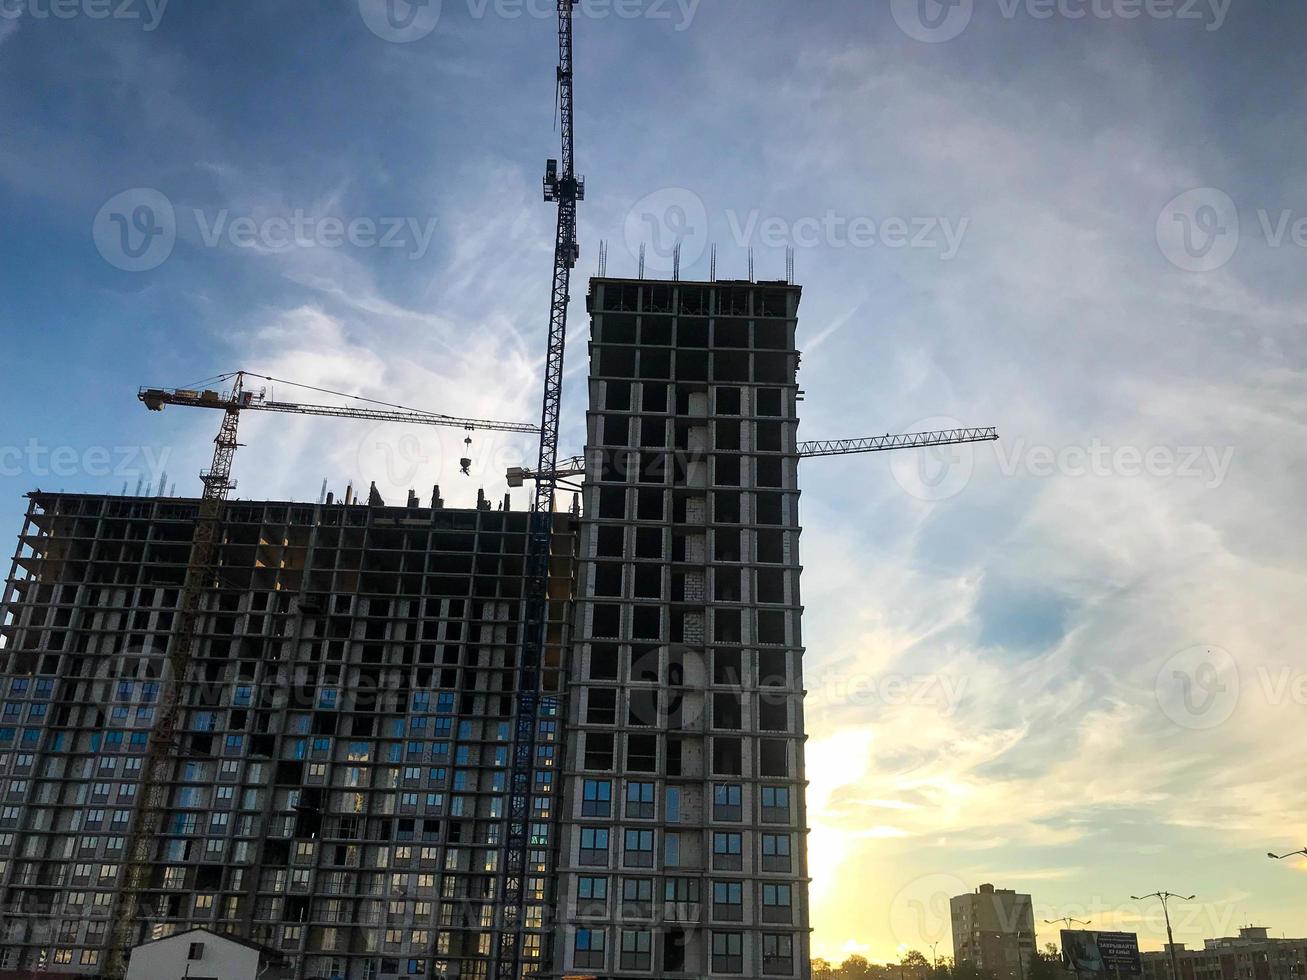 construction cranes are erecting new houses from blocks. new constructions, places of life of people. building urban landscape. creation of a new quarter in the city center photo